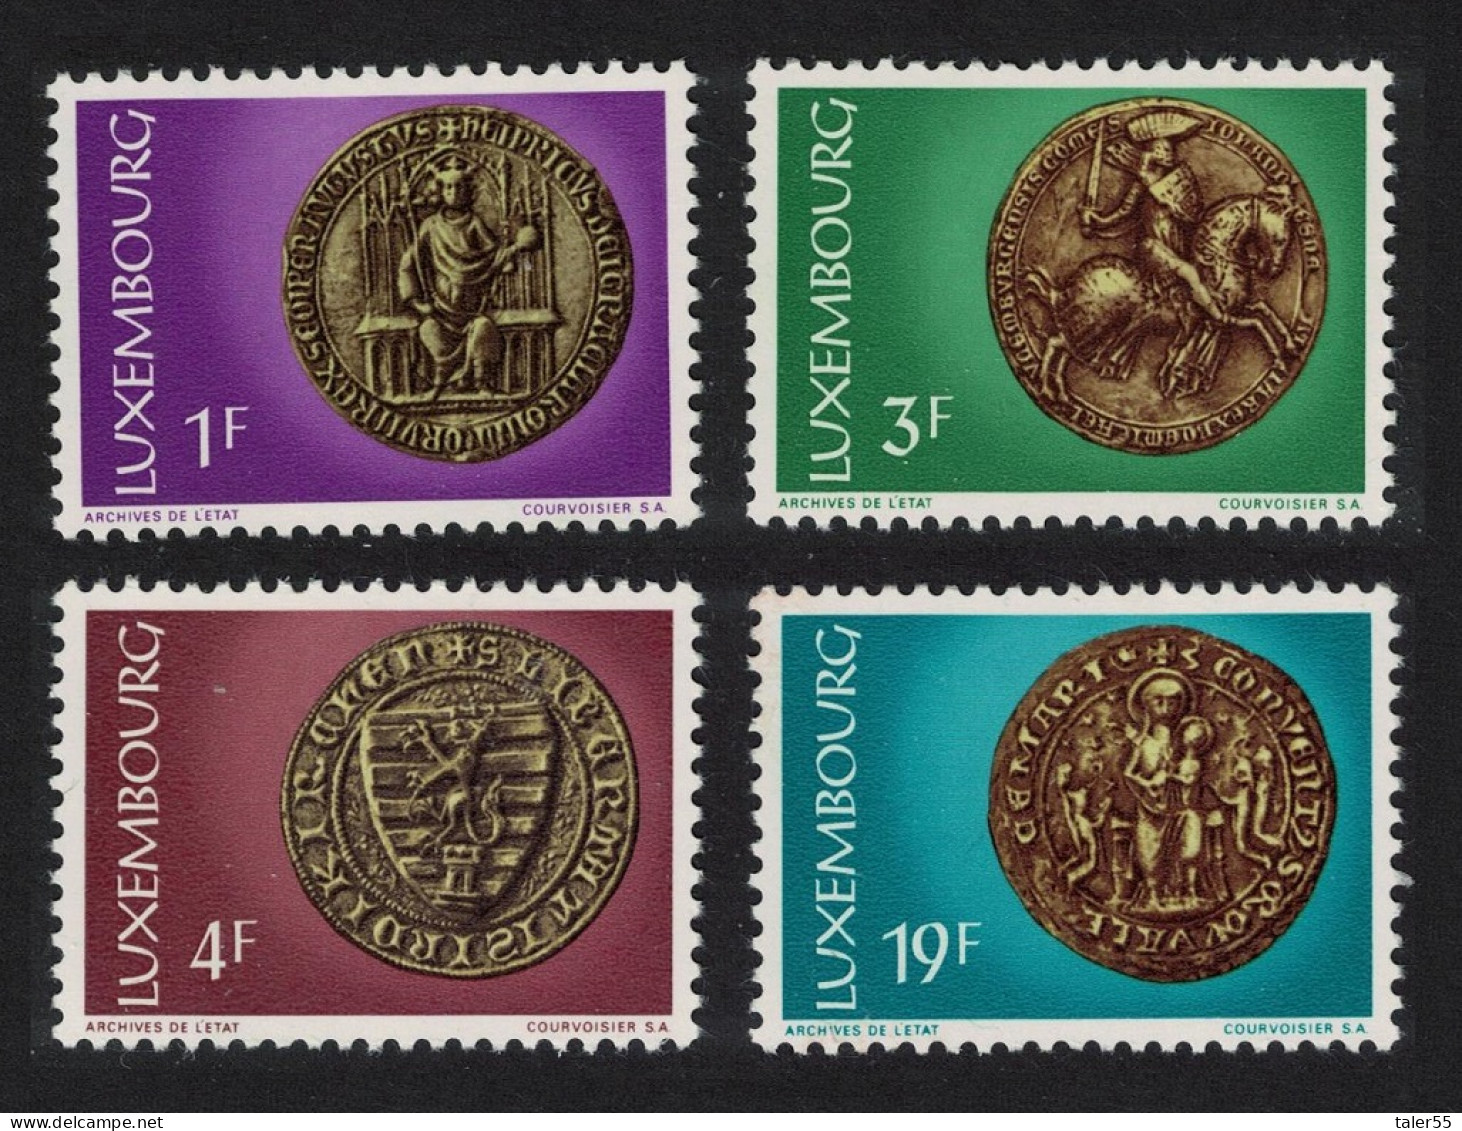 Luxembourg Seals In Luxembourg State Archives 4v 1974 MNH SG#922-925 MI#878-881 - Ungebraucht